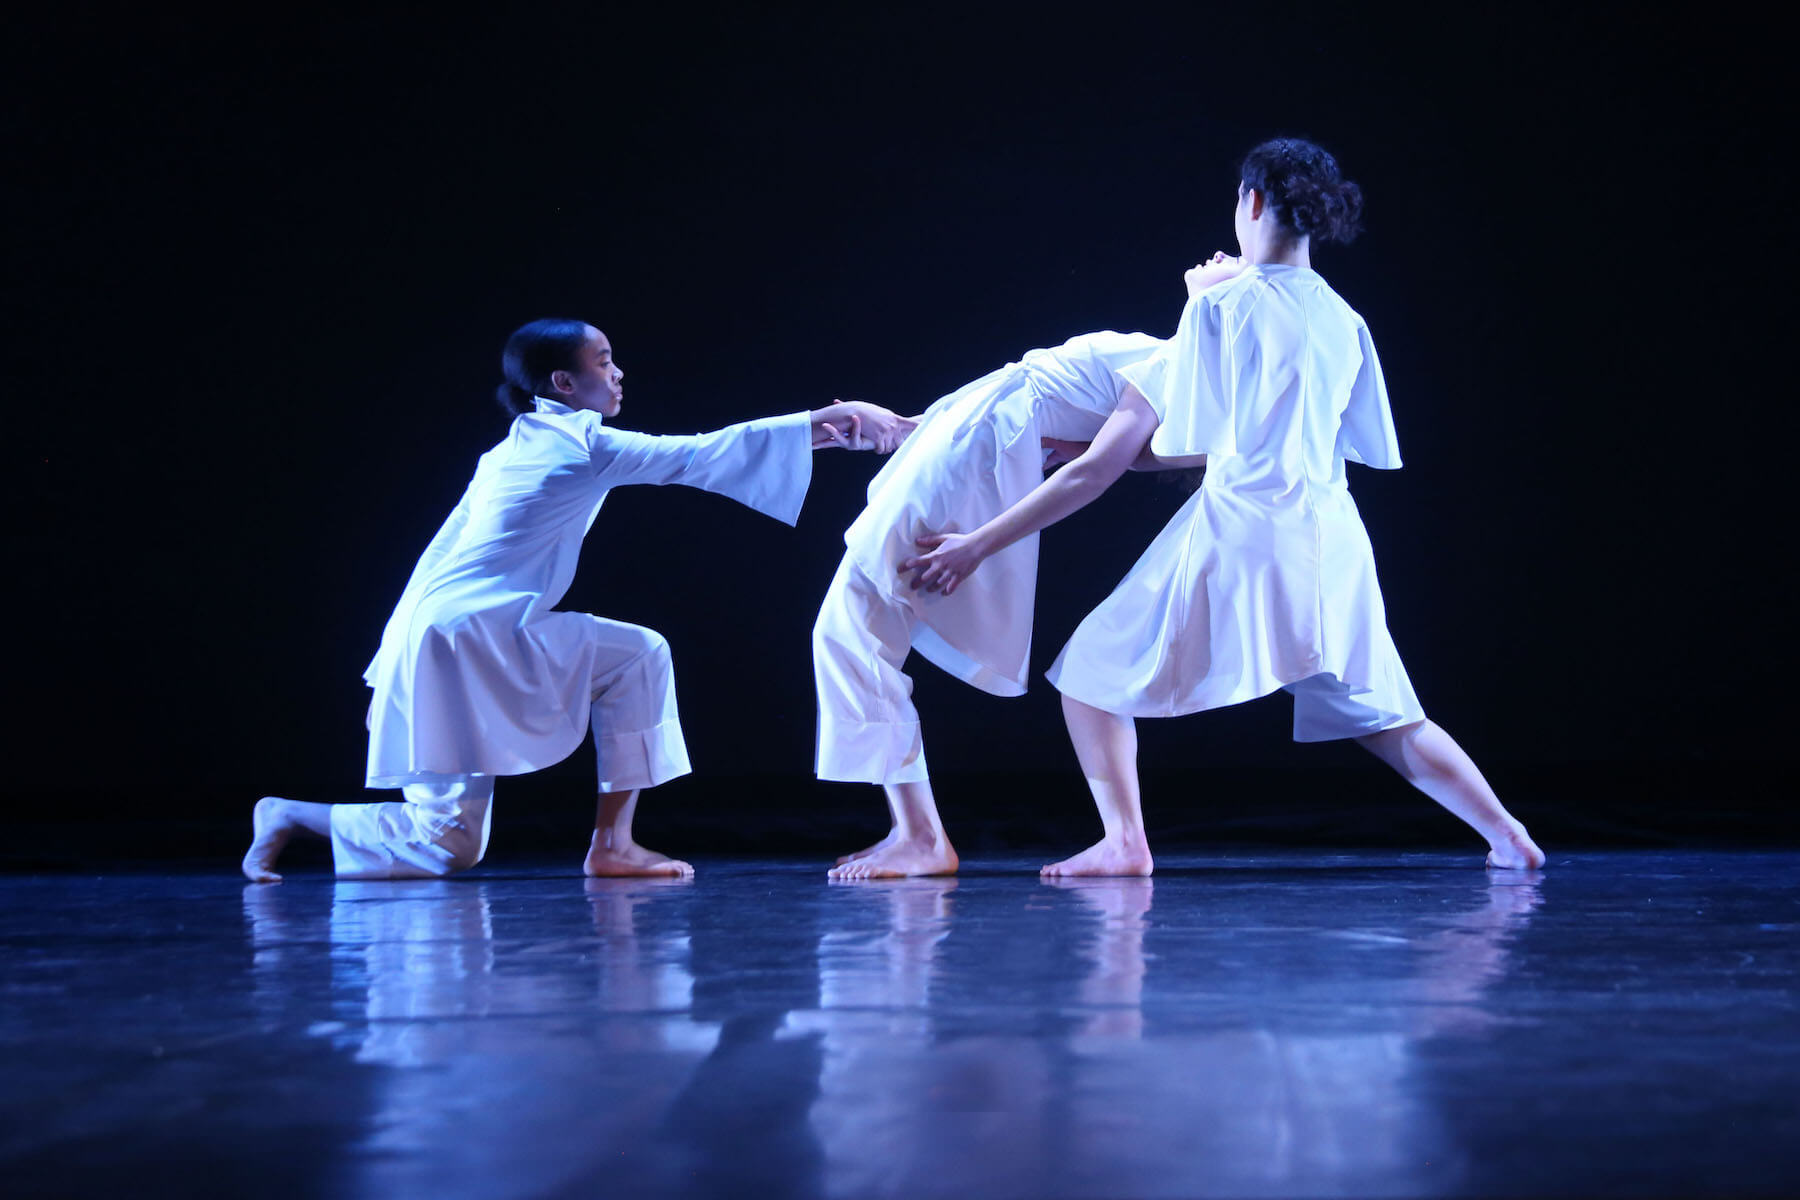 Three Ethical Culture Fieldston School Students perform in Upper School Repertory Dance Project